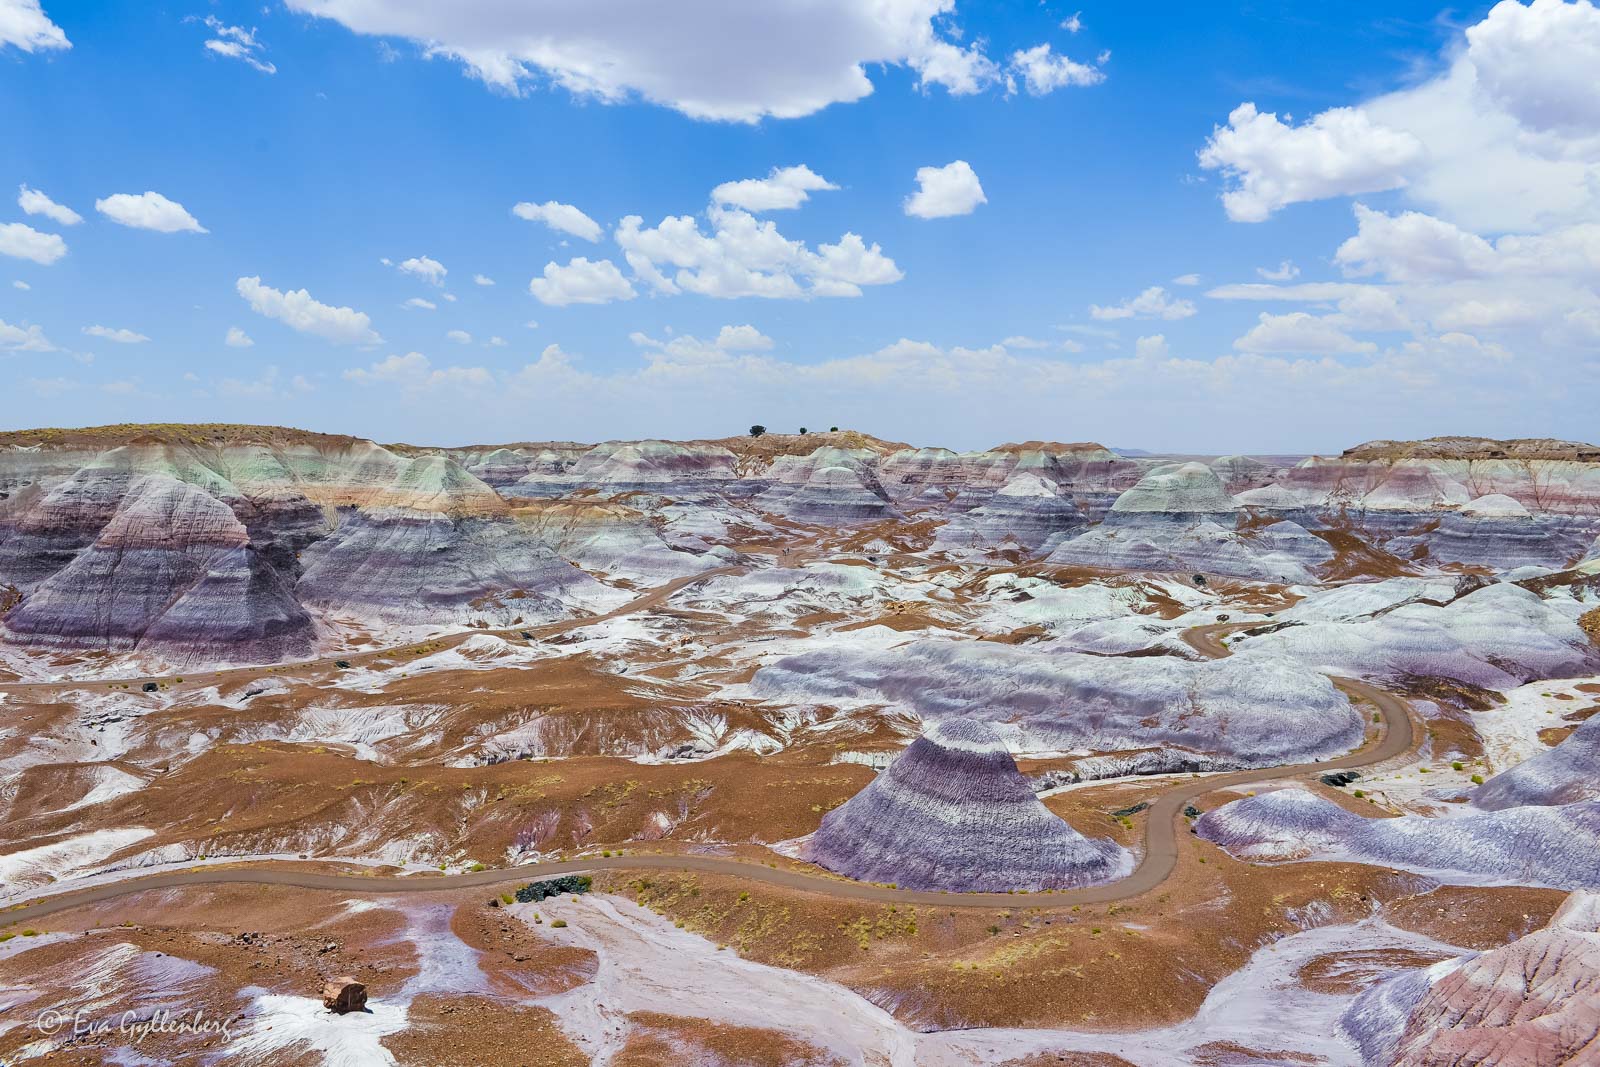 Striped mountains in the Petrified Forest